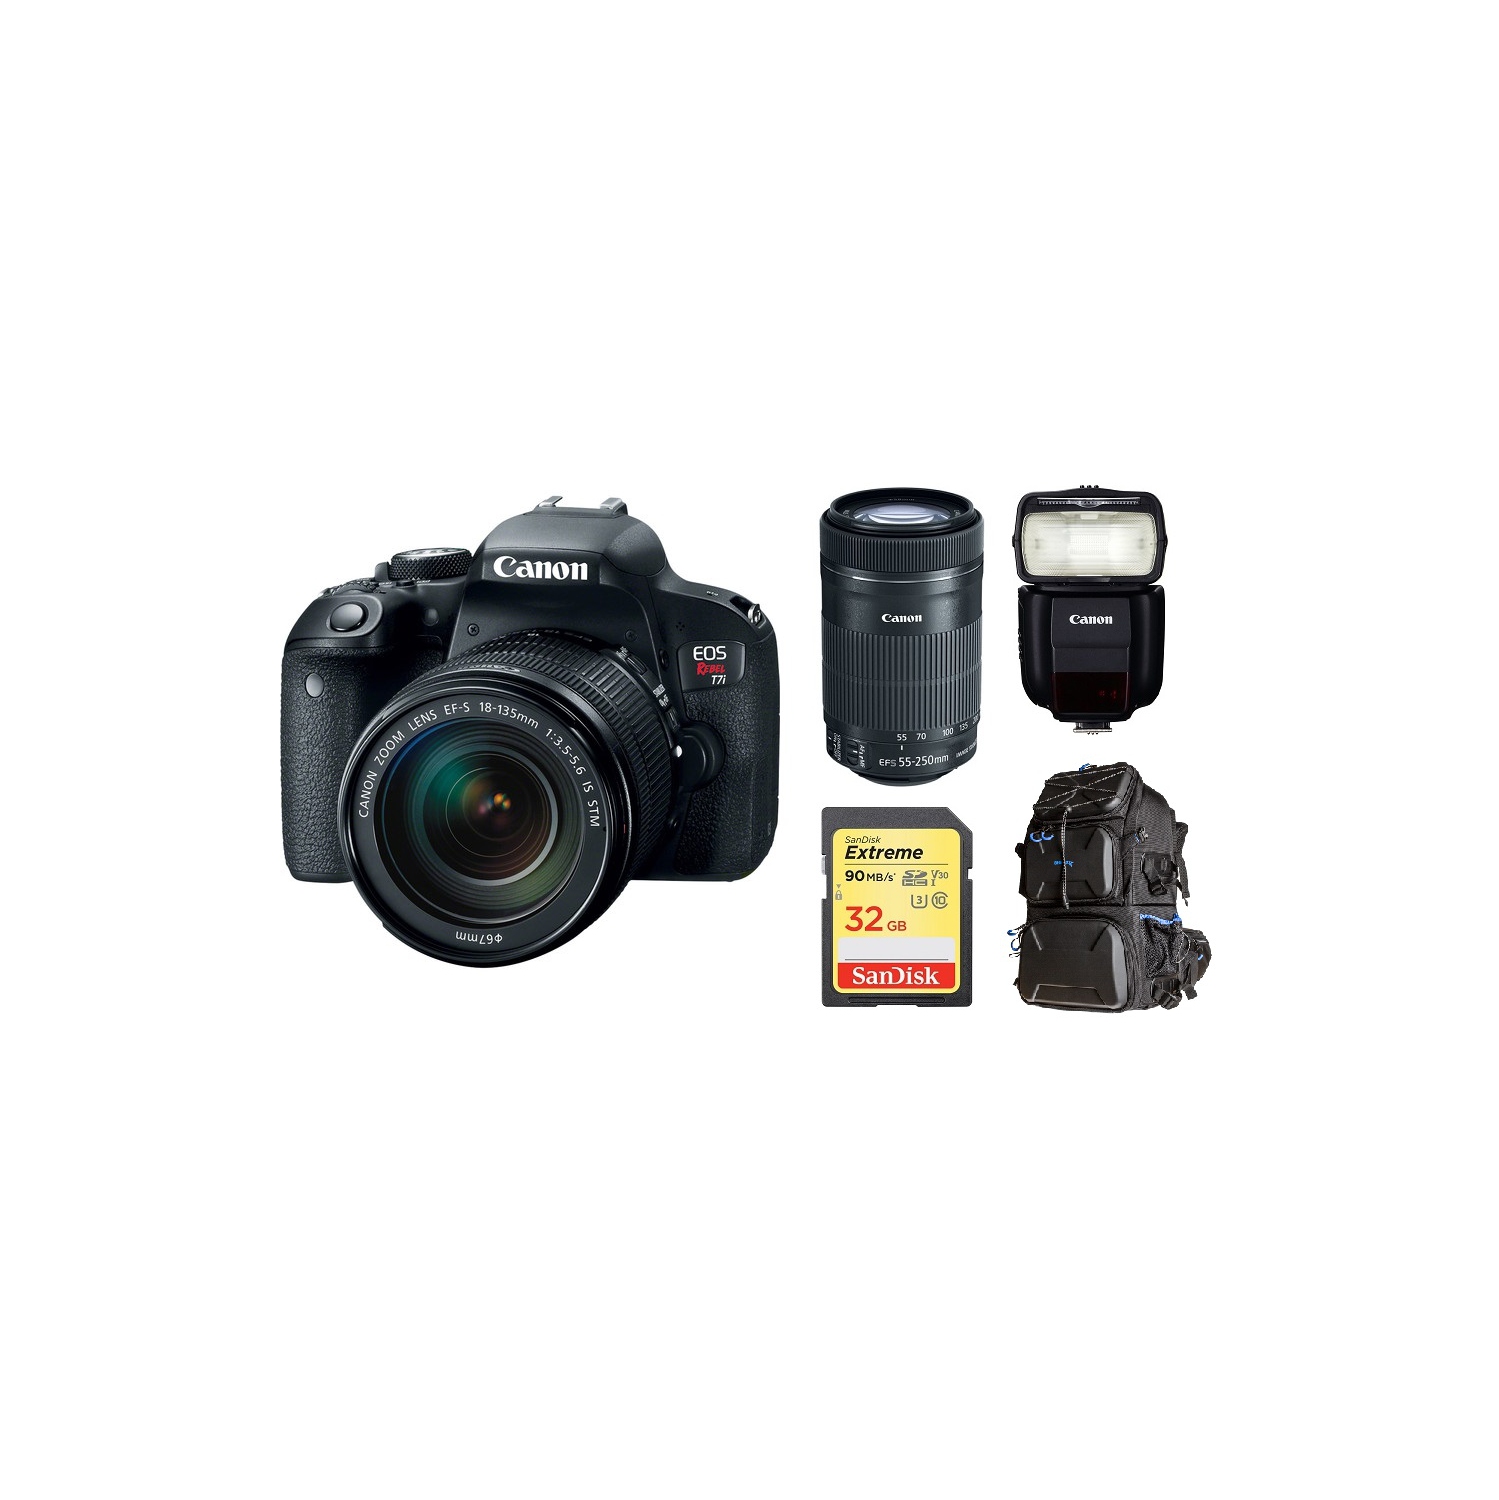 Canon T7i DSLR Camera with 18-135mm With Everything You Need Bundle International Version w/Seller Provided Warranty